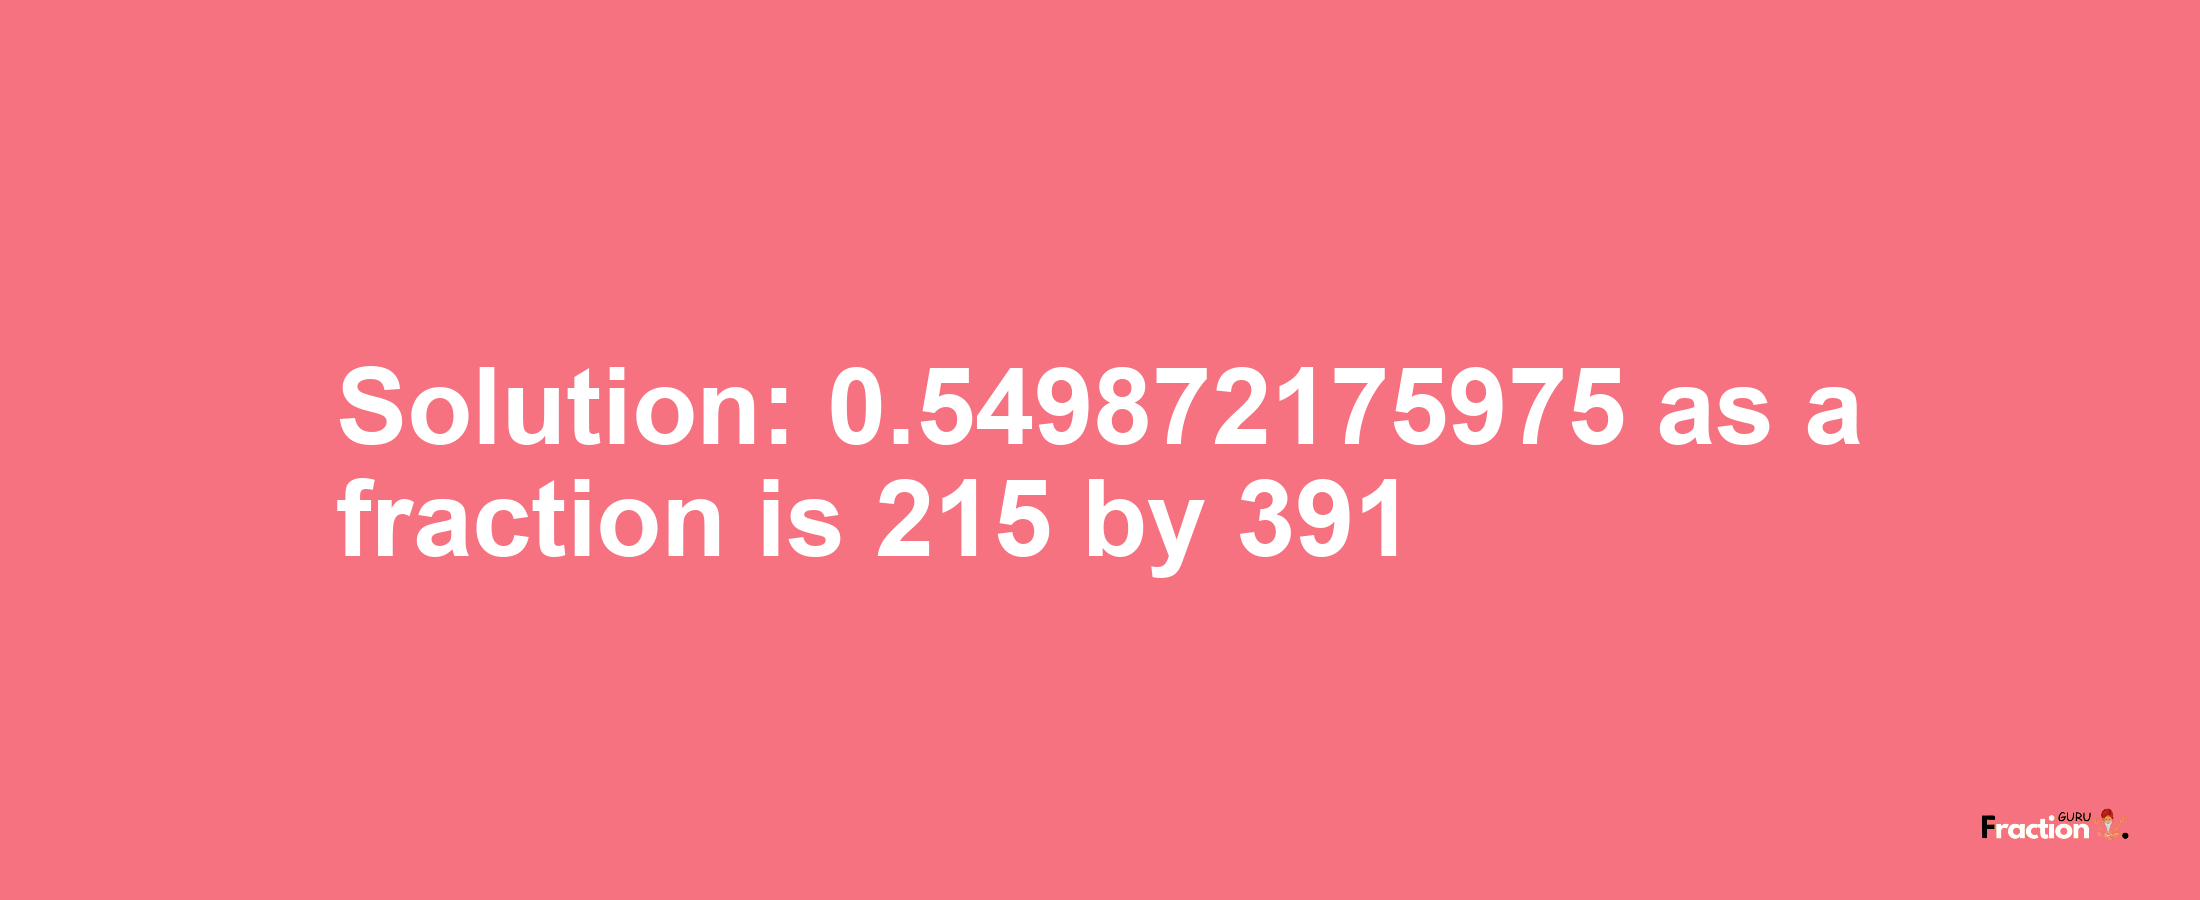 Solution:0.549872175975 as a fraction is 215/391